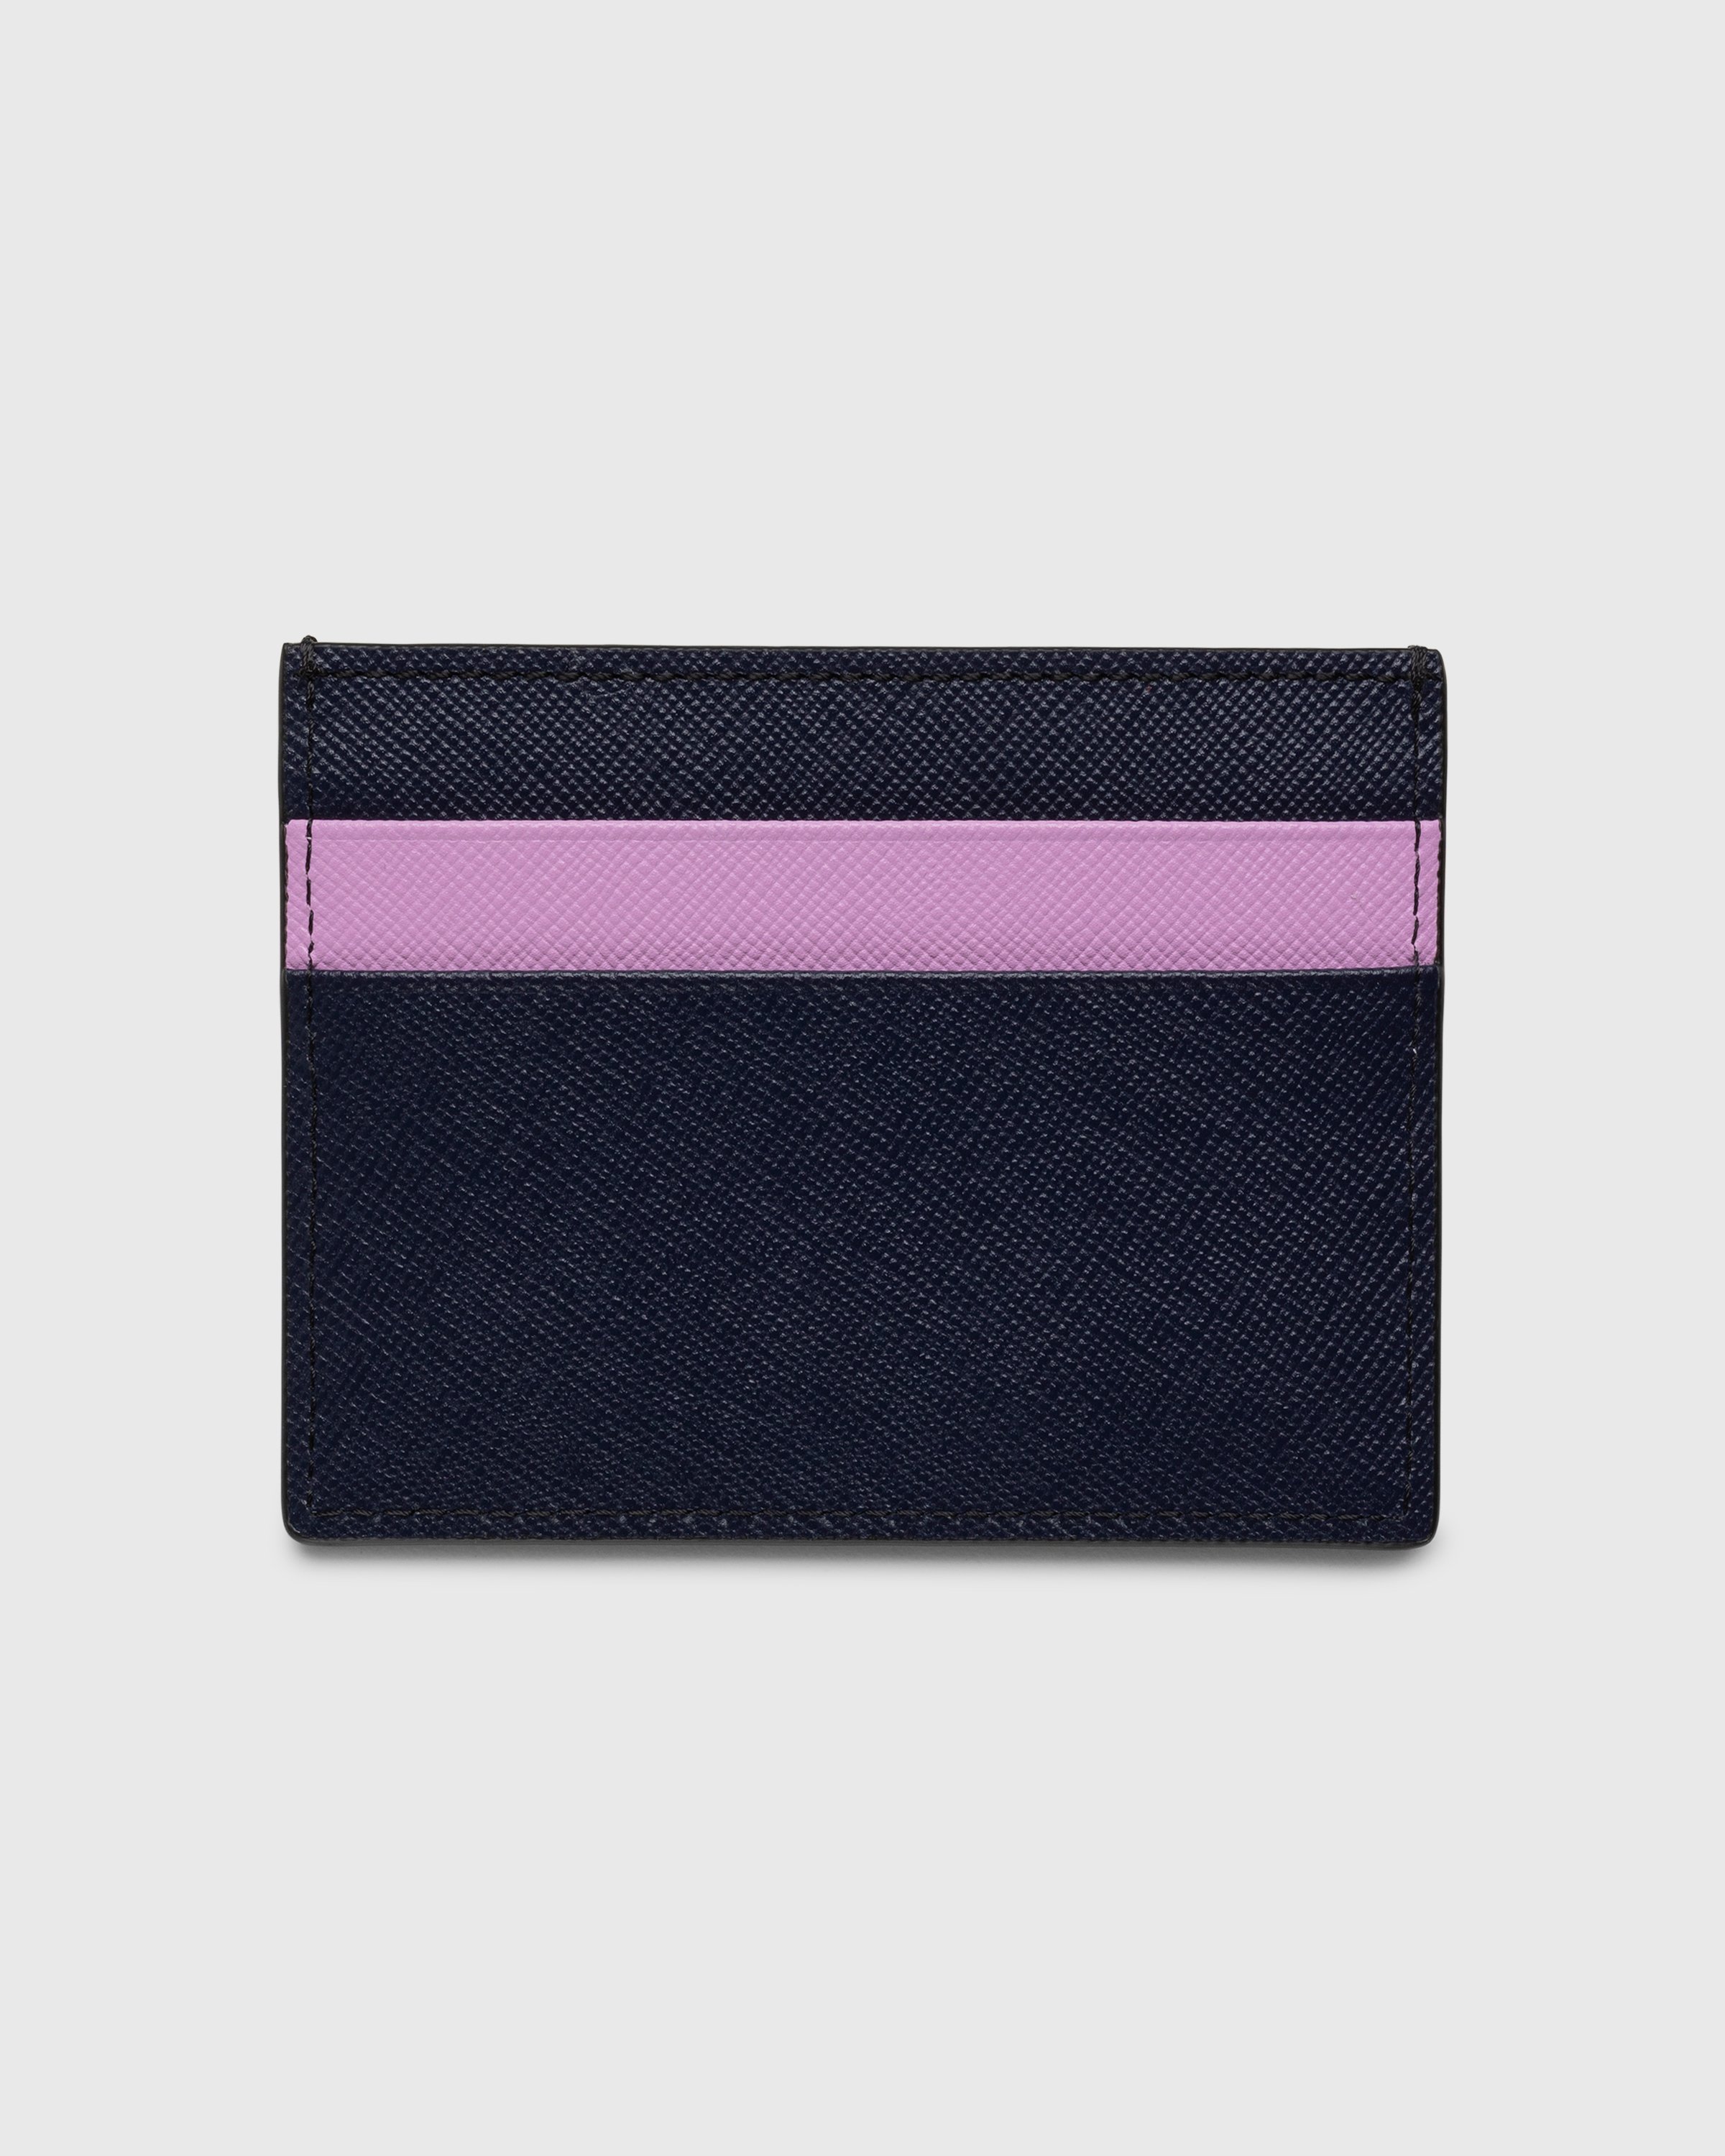 Marni - Leather Card Holder Blue Black/Pink Candy - Accessories - Blublack/Pink Candy - Image 2